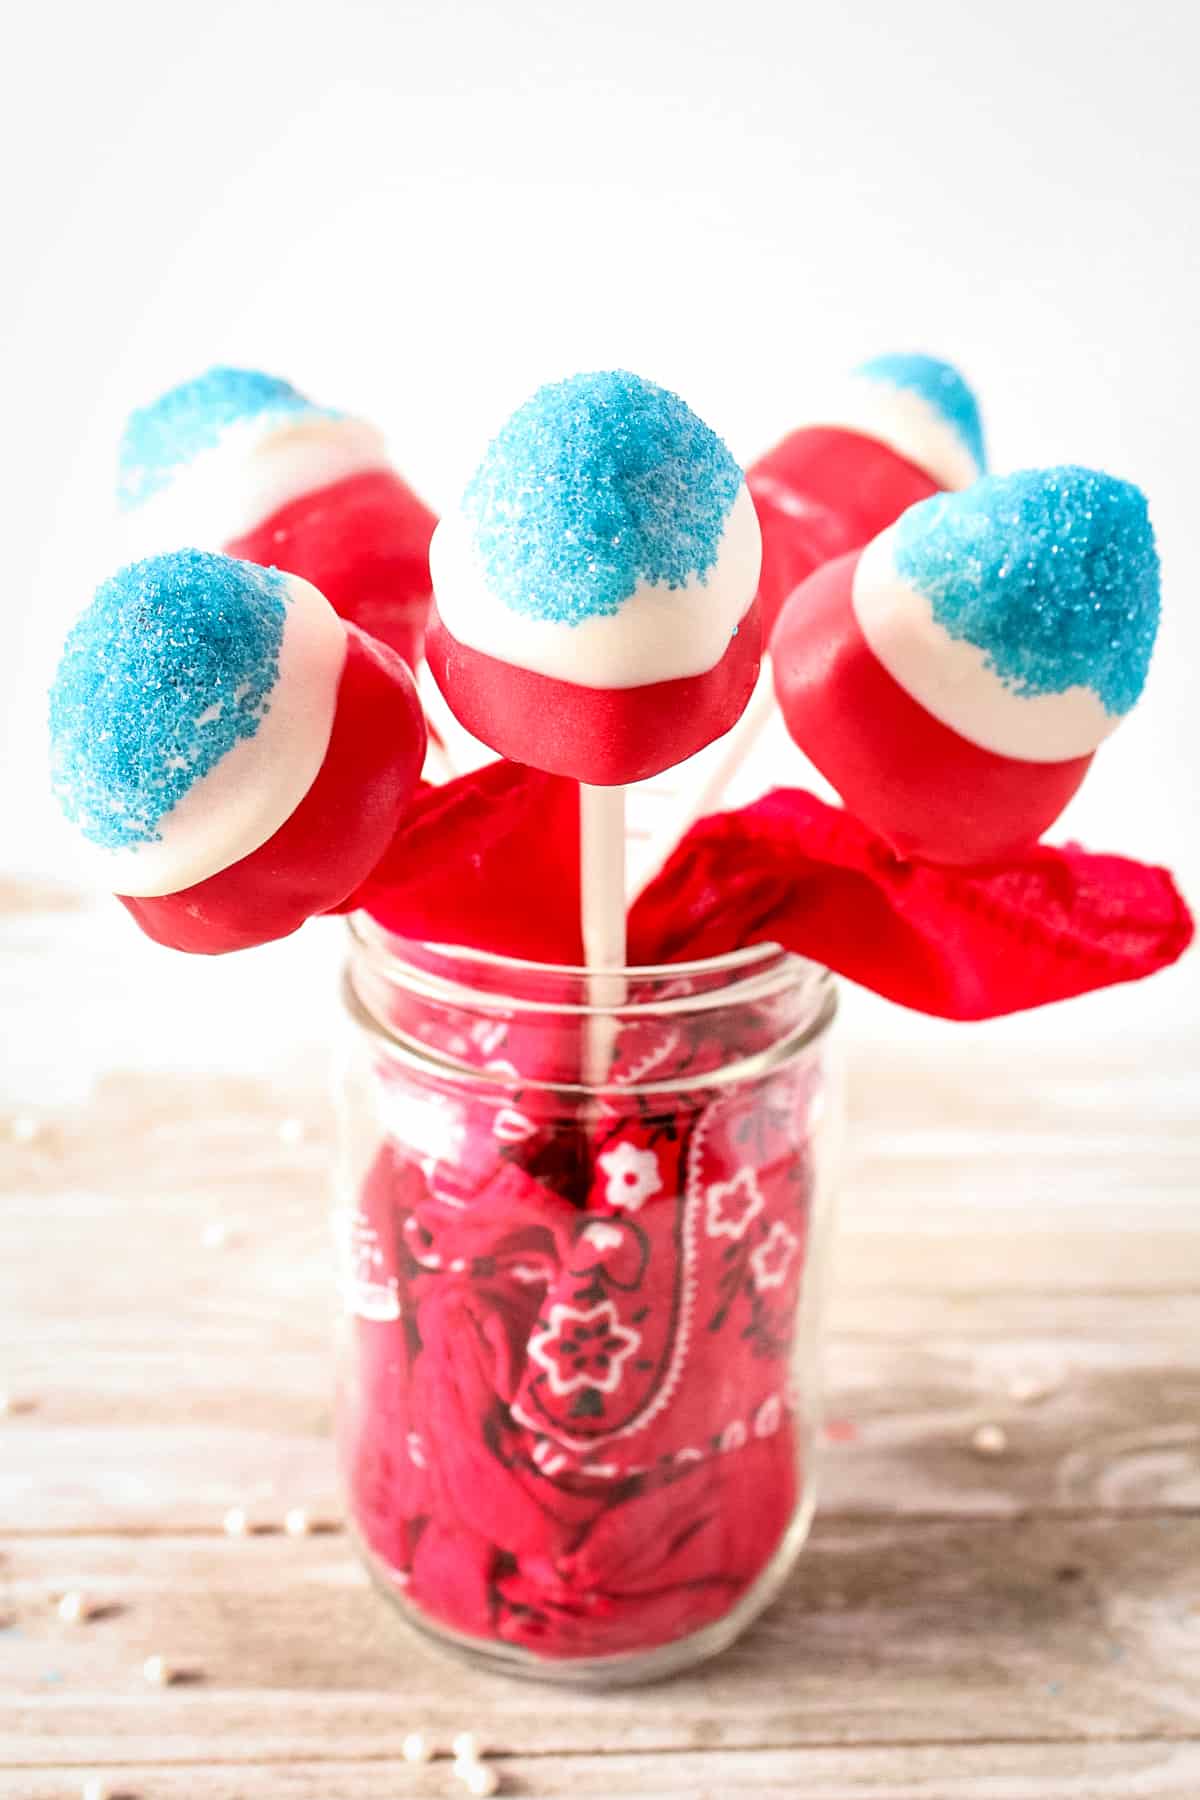 Red, white, and blue covered strawberries on sticks in a mason jar. The mason jar has a red bandana stuffed in it.